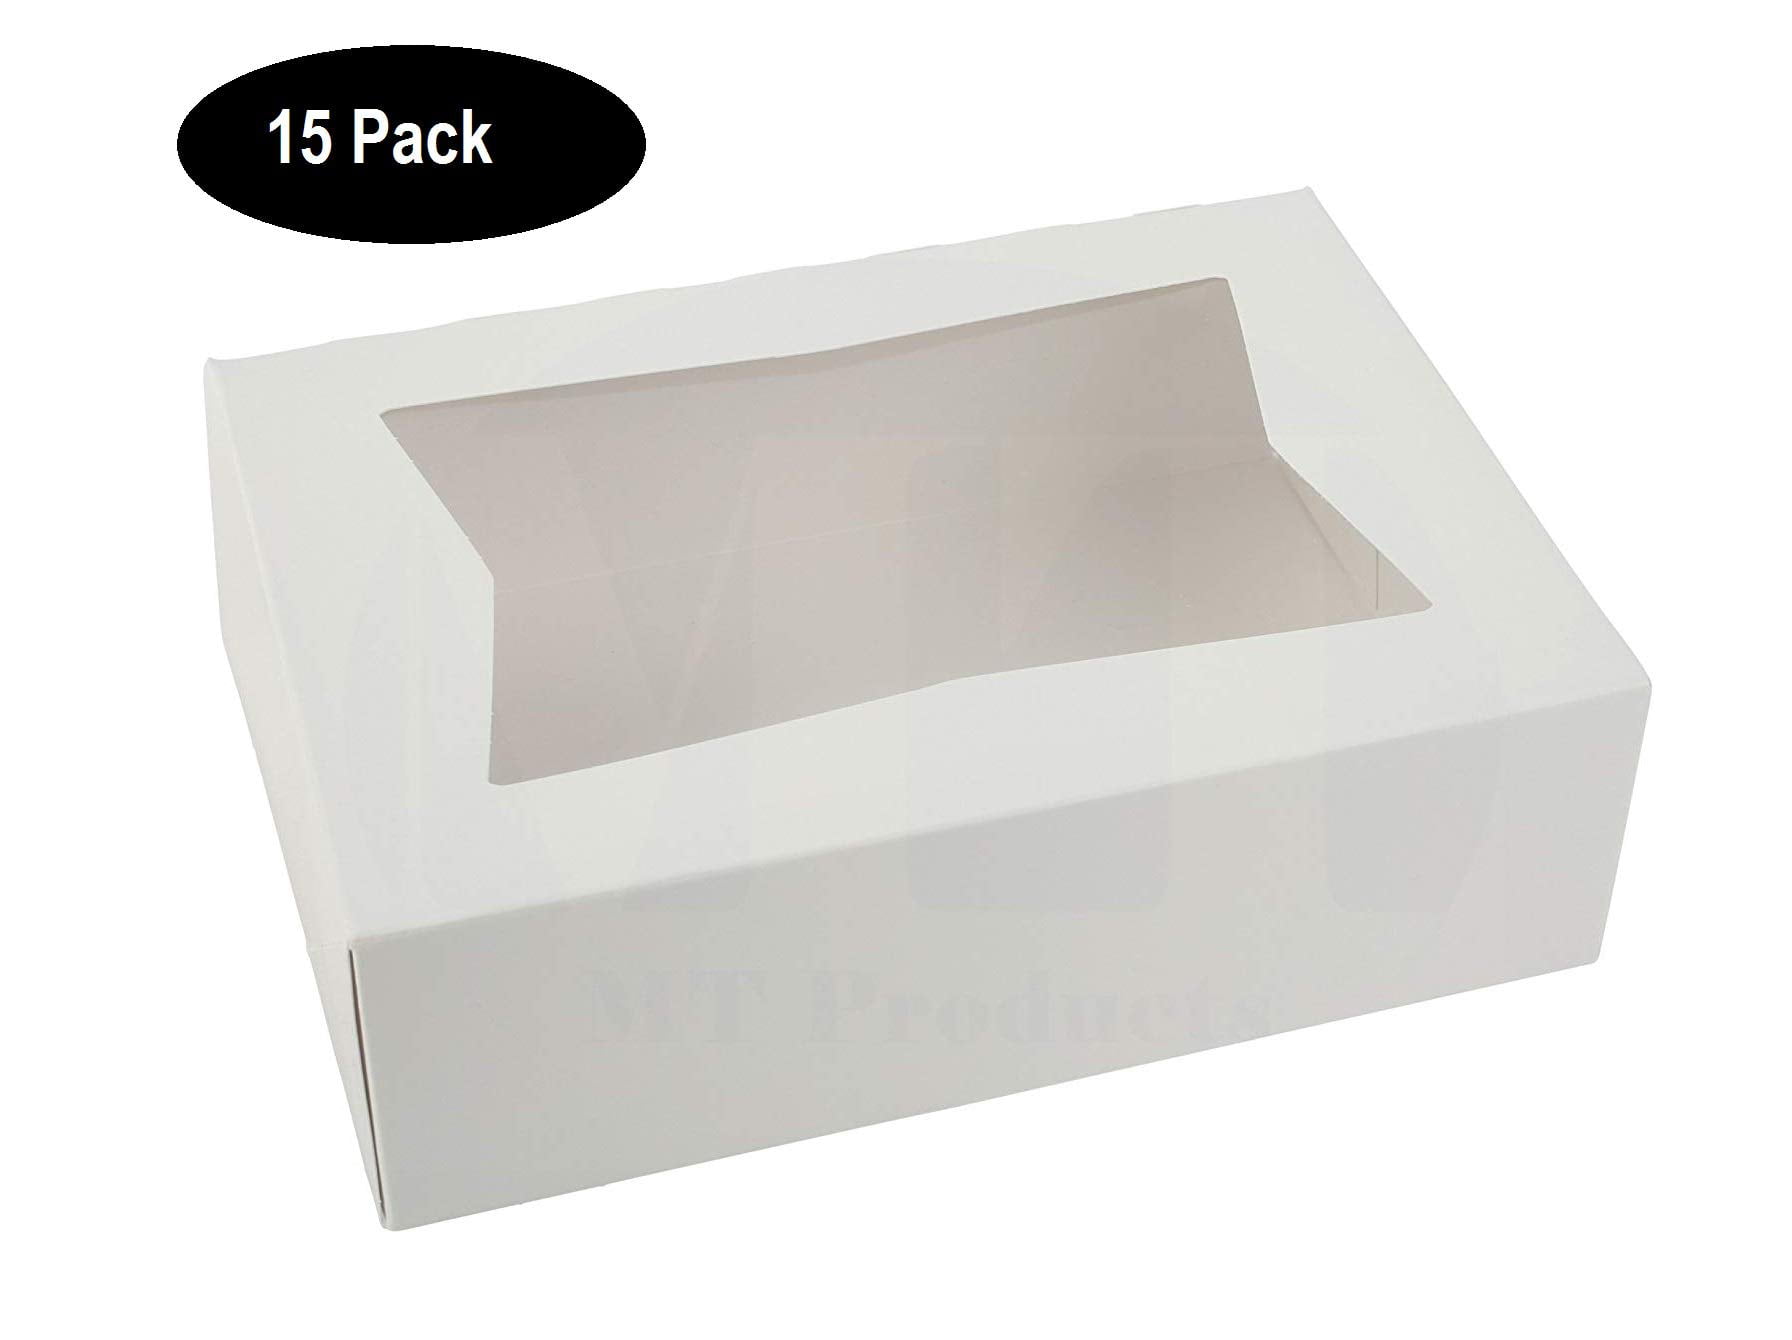 White Pastry Bakery Box Paperboard Box Size 8" L x 5 3/4" W x 2 1/2